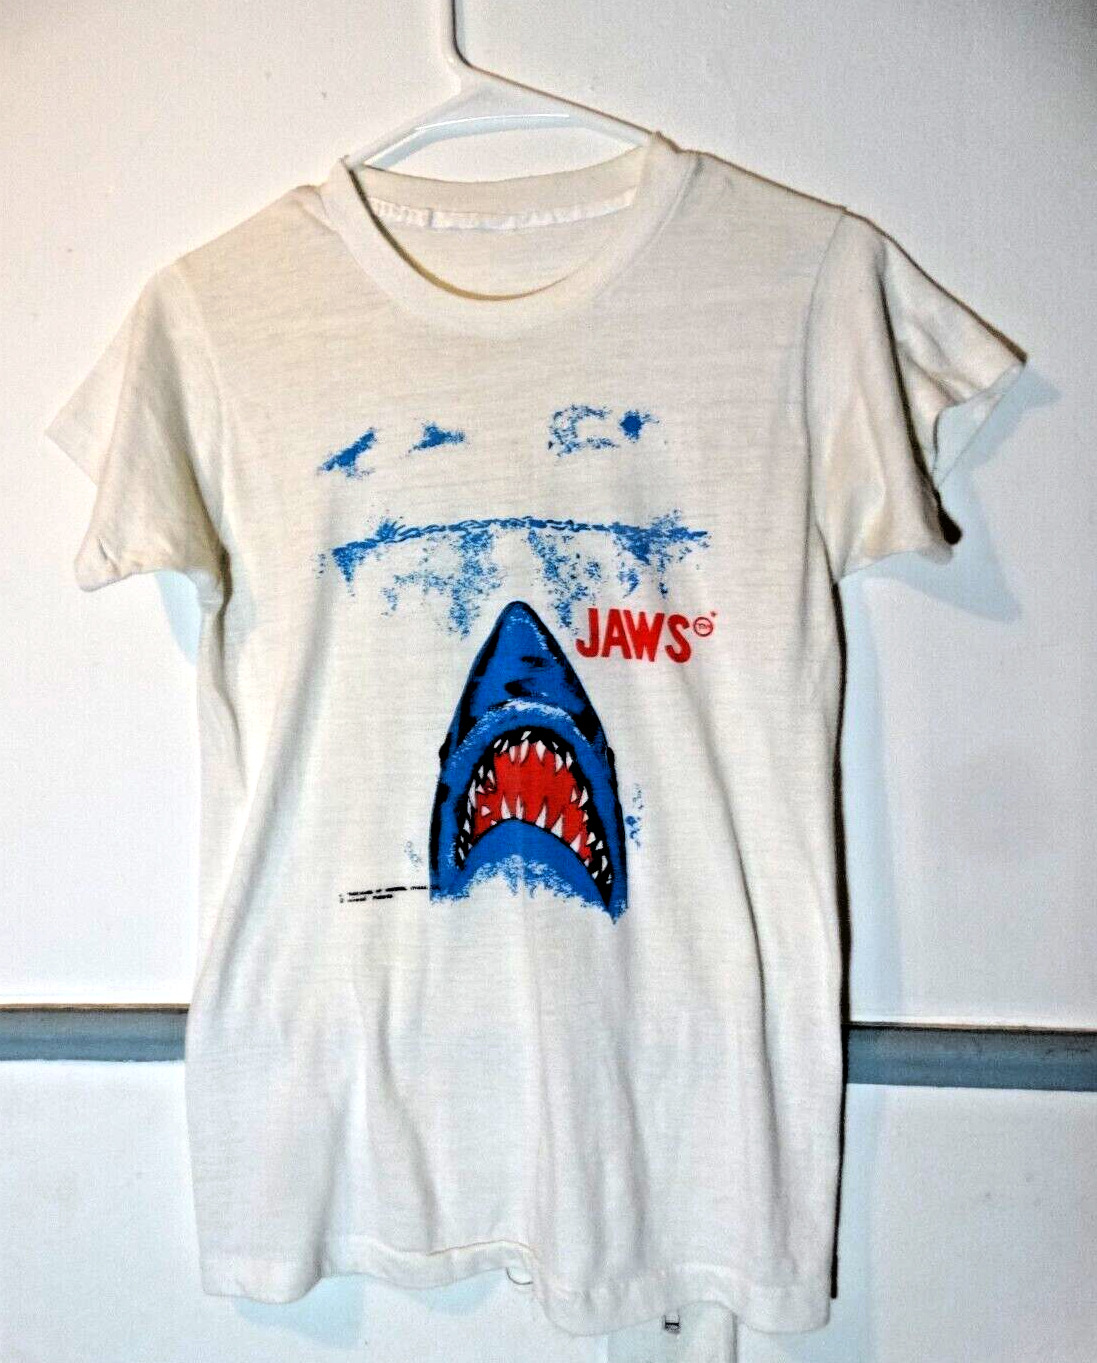 REAL VINTAGE RARE 1975 JAWS MOVIE T-SHIRT Very Small & Sheer Jawesome :D